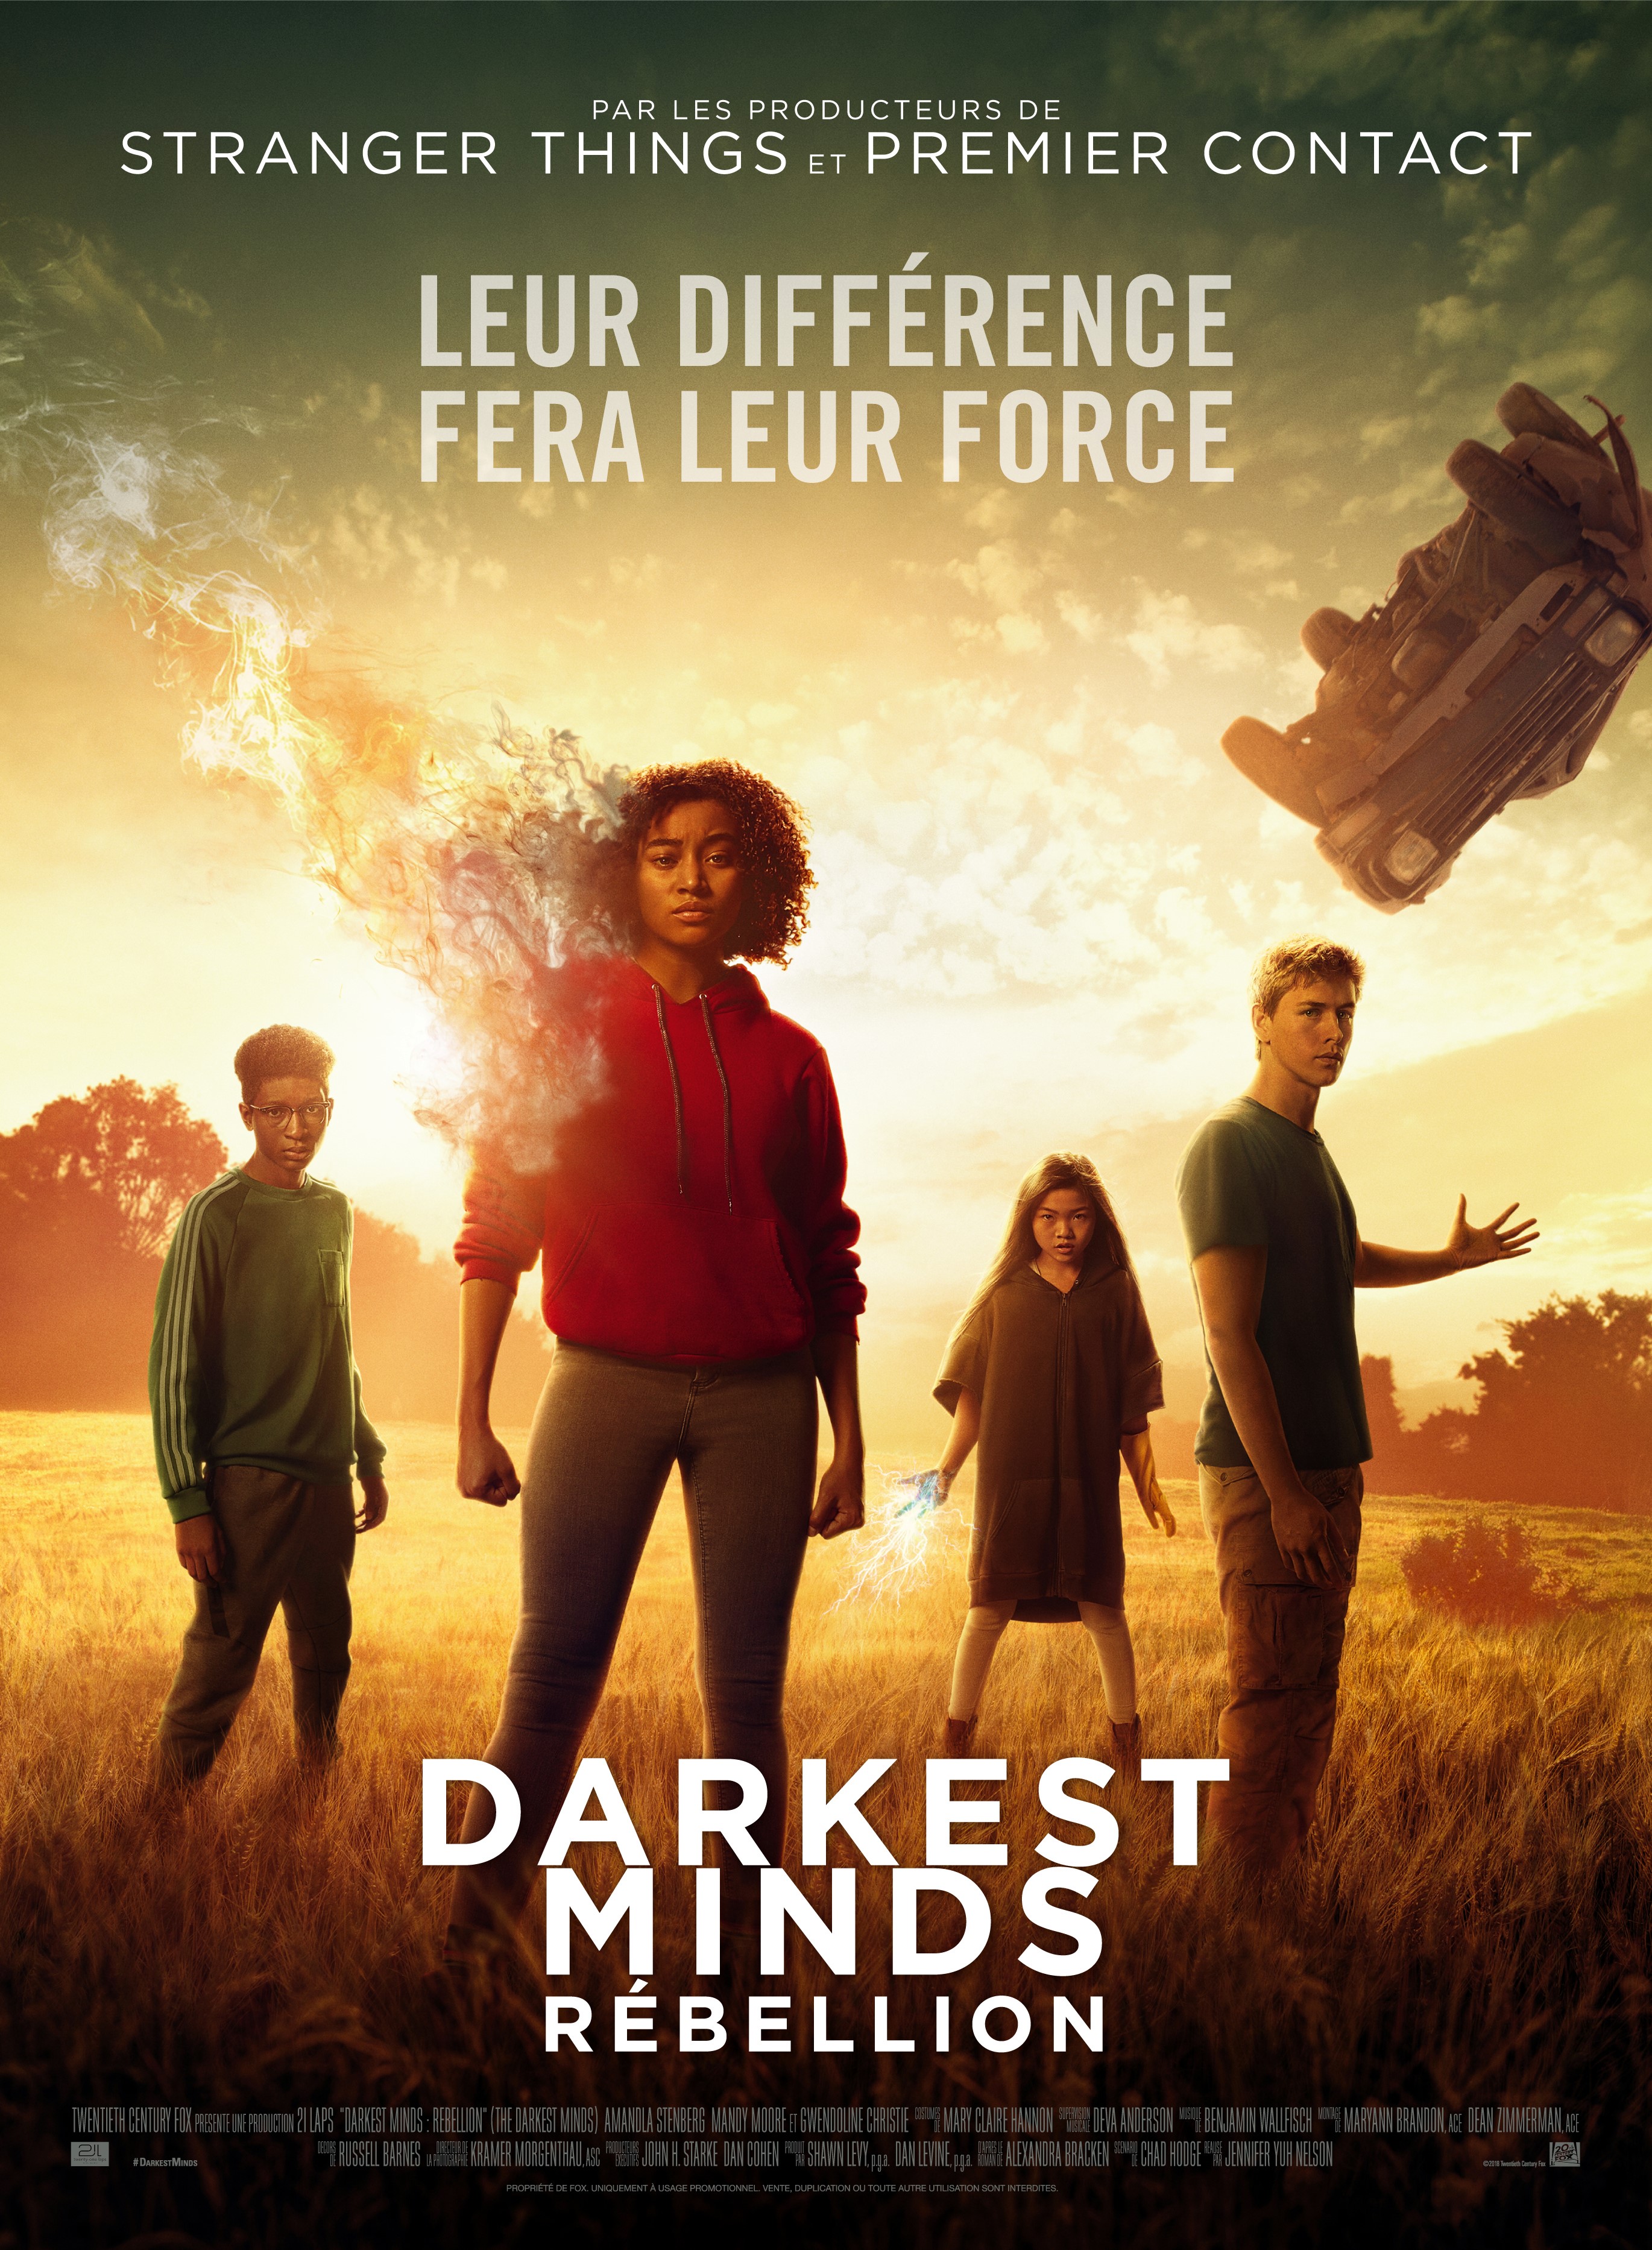 The Darkest Minds 2018 Movie Poster Wallpapers